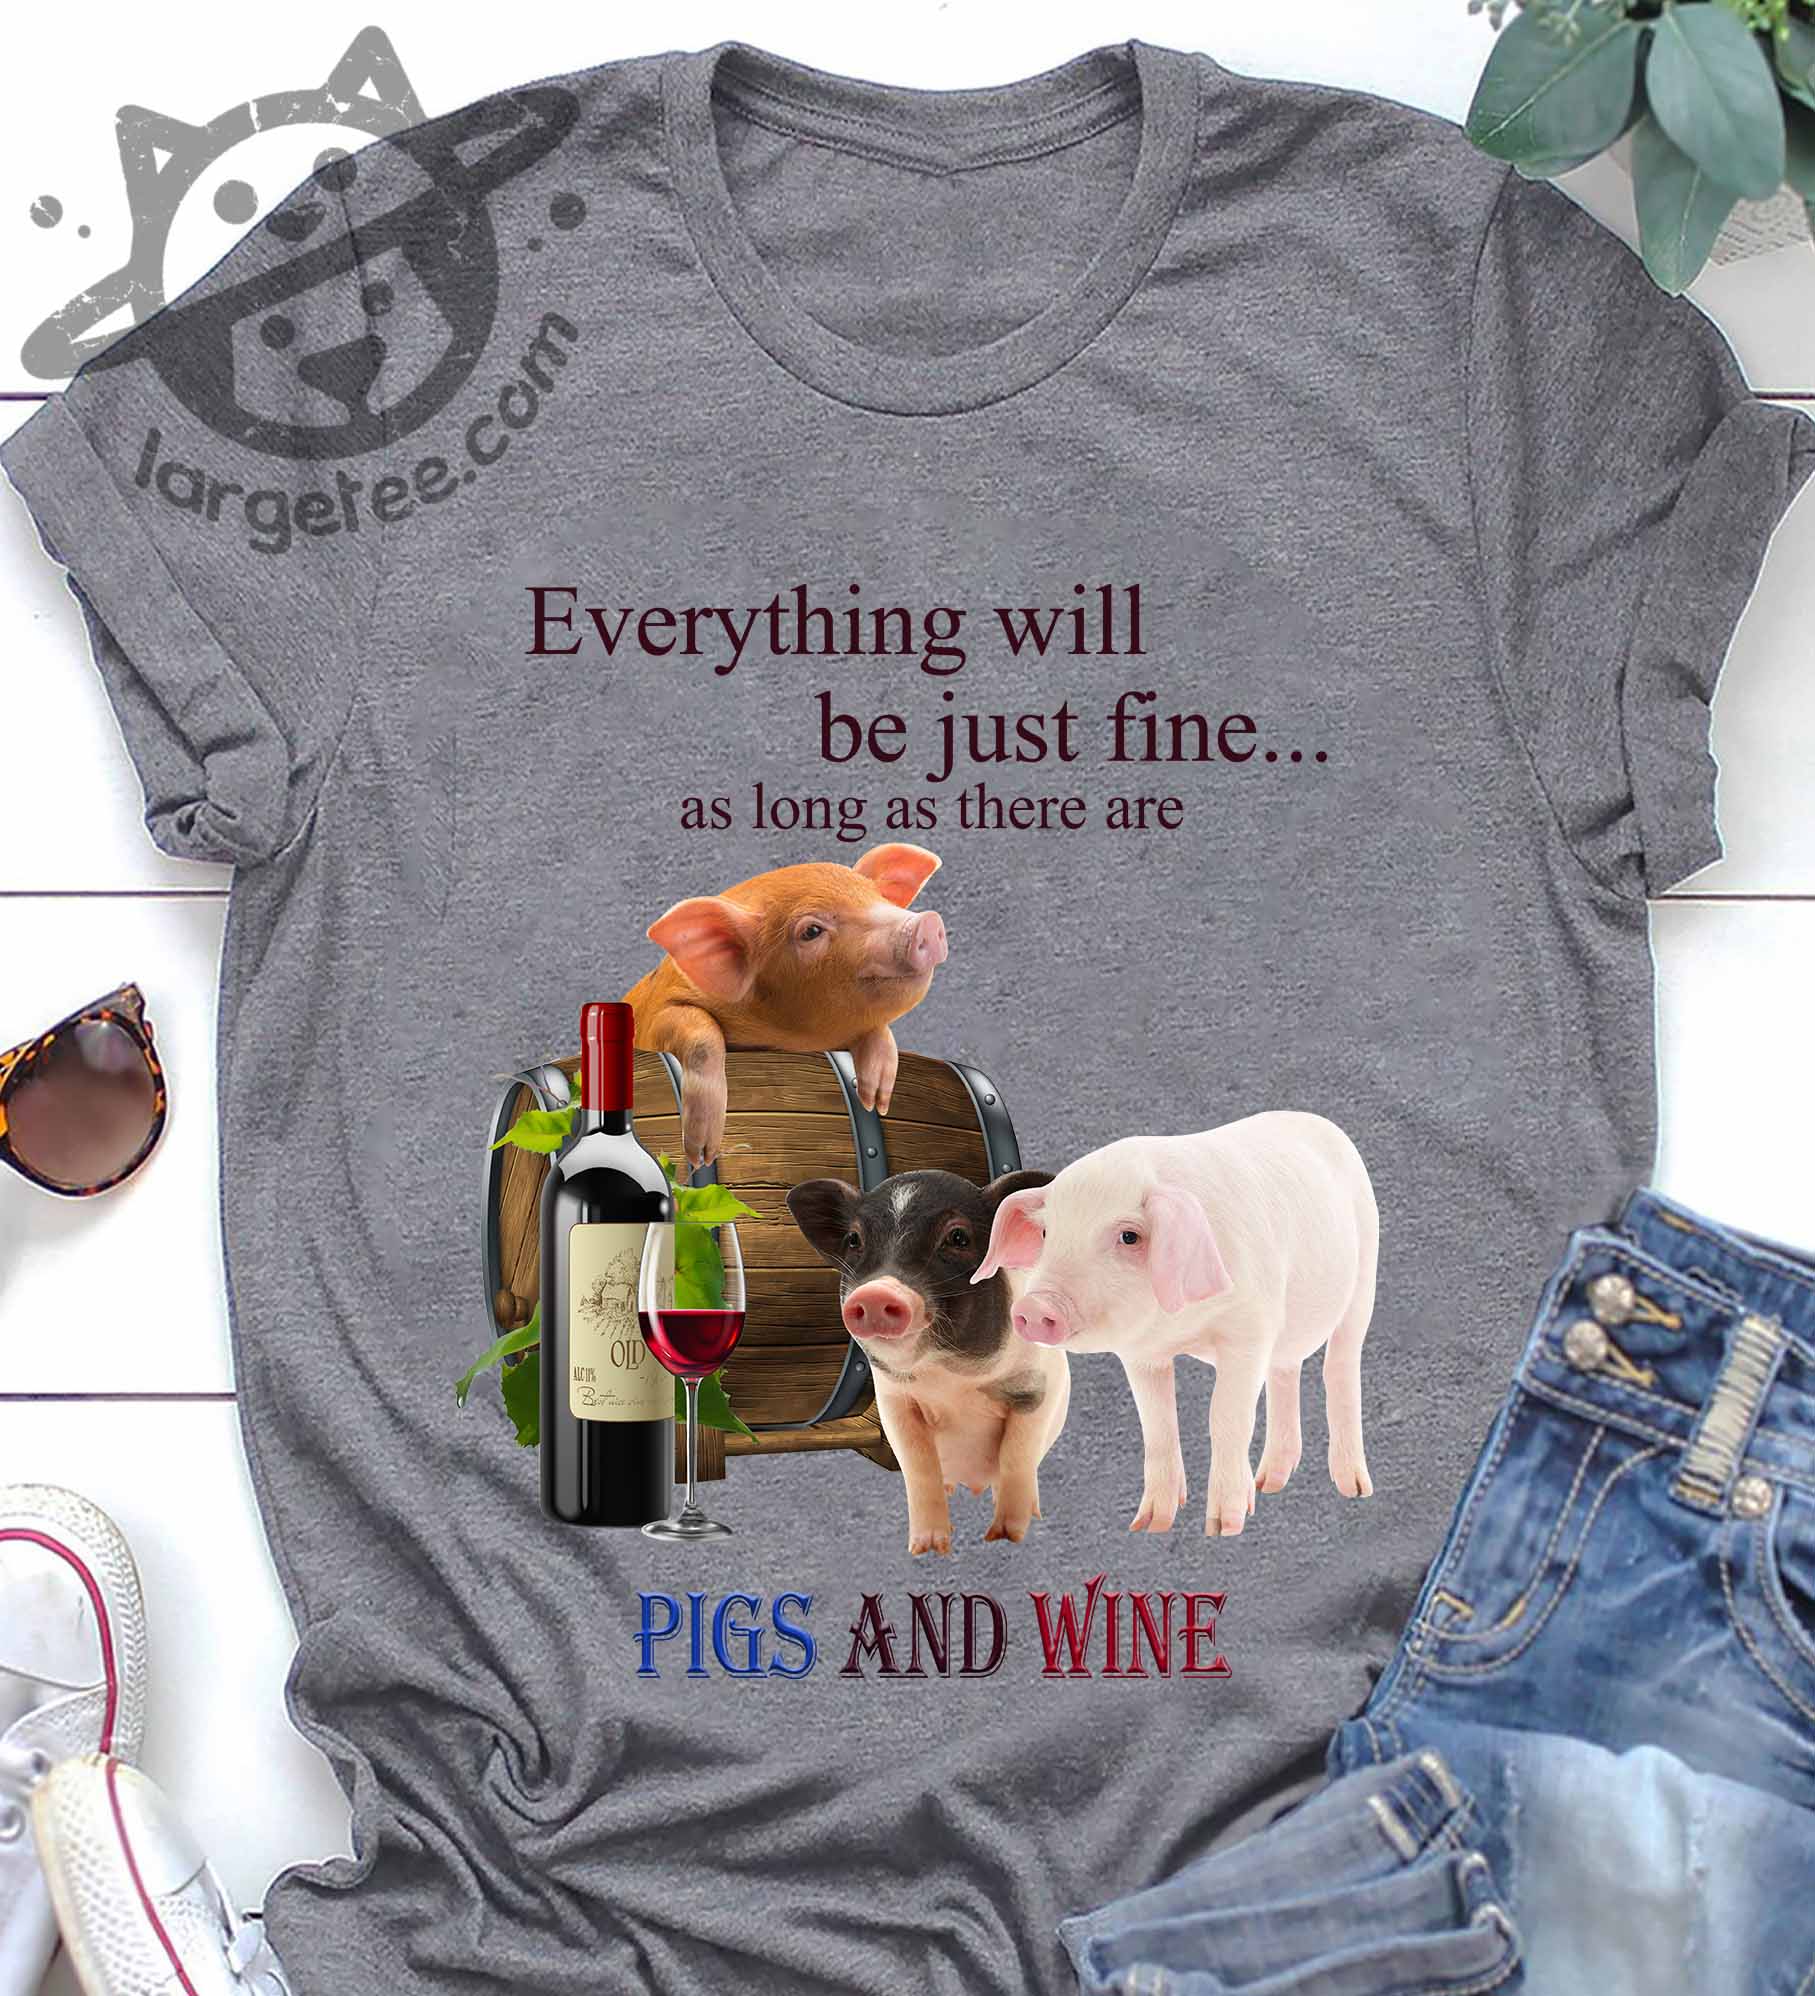 Everything will be just fine as long as there are pigs and wine